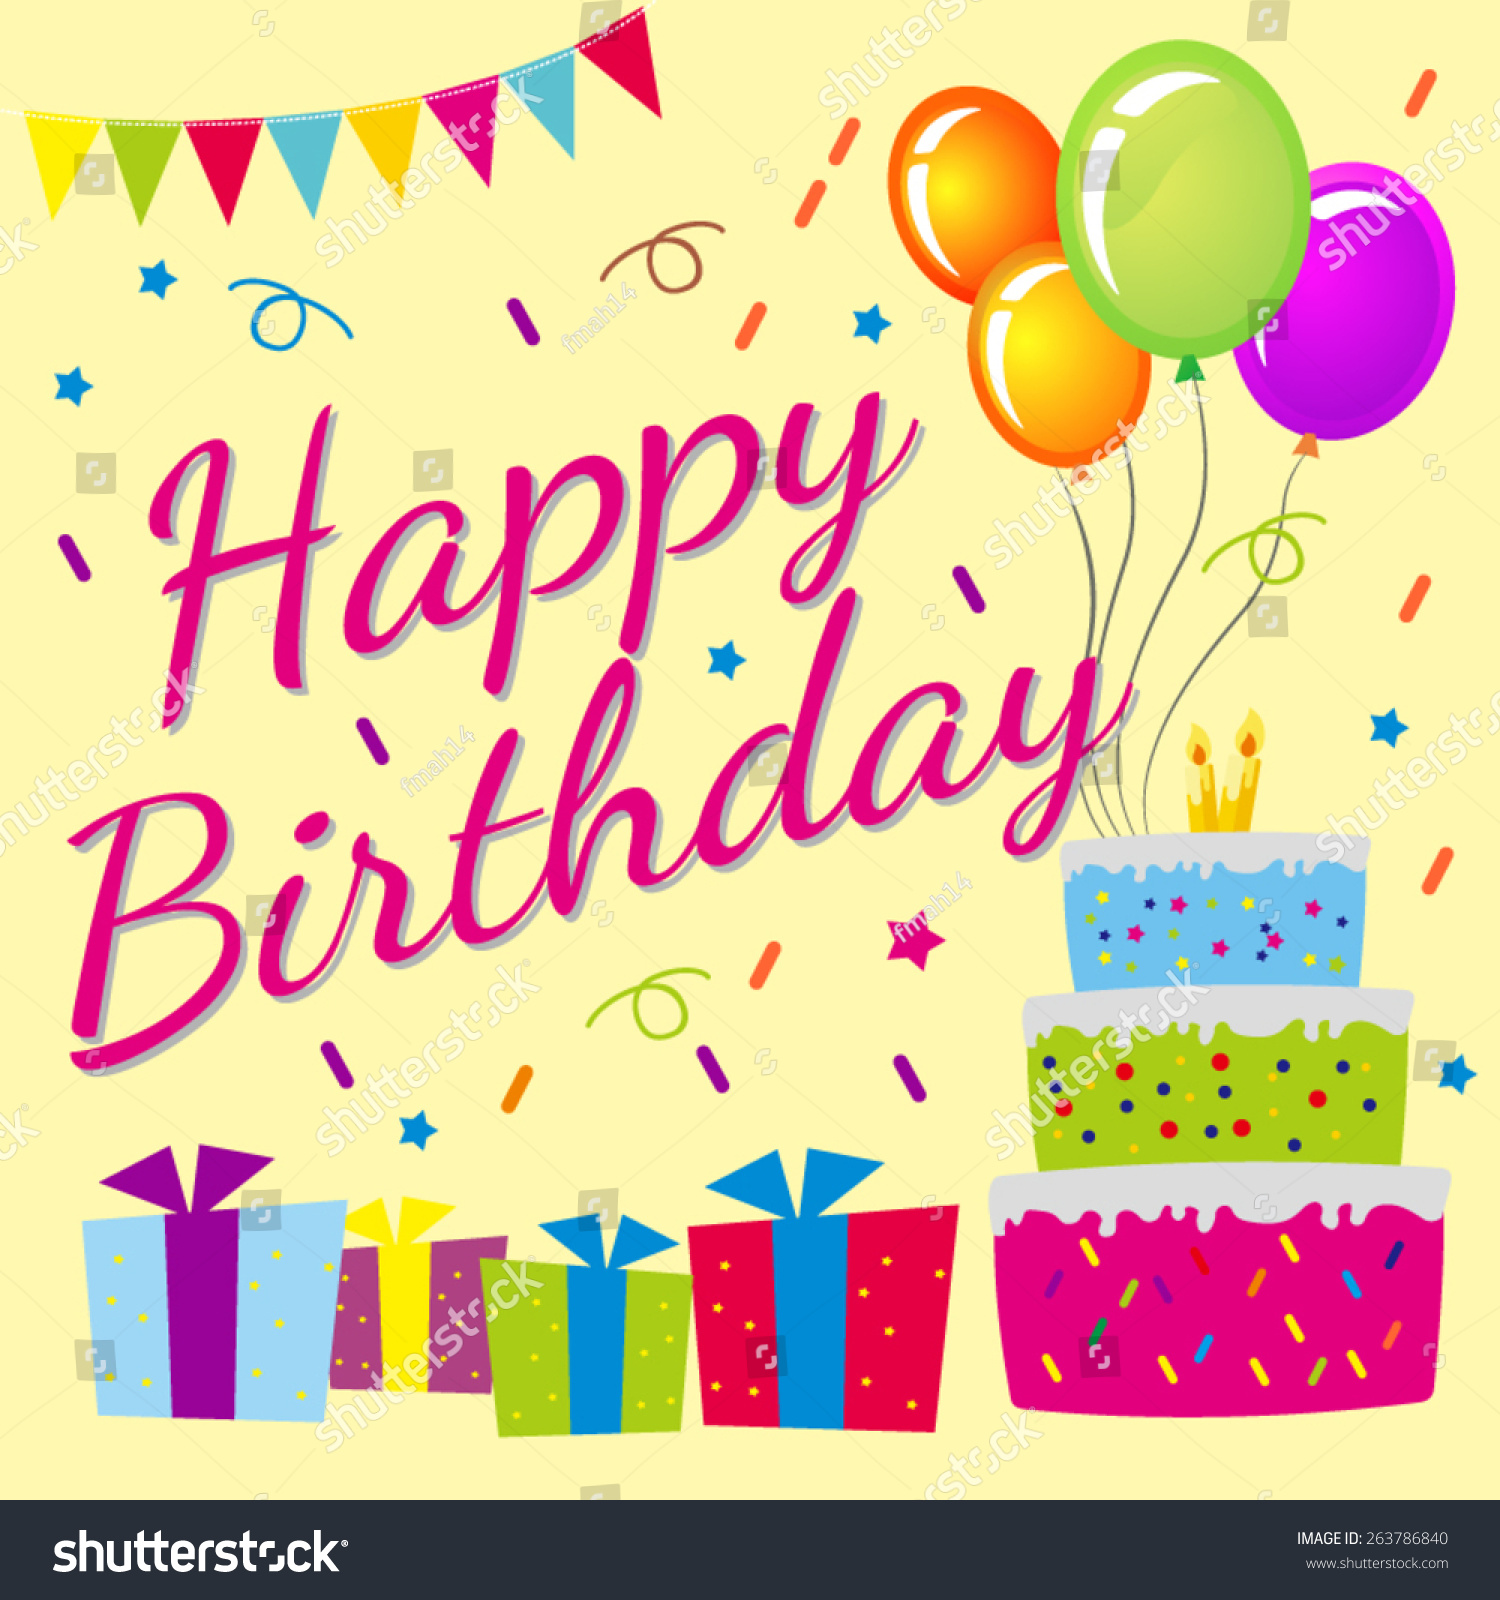 Download Happy Birthday Greeting Card Stock Vector 263786840 ...